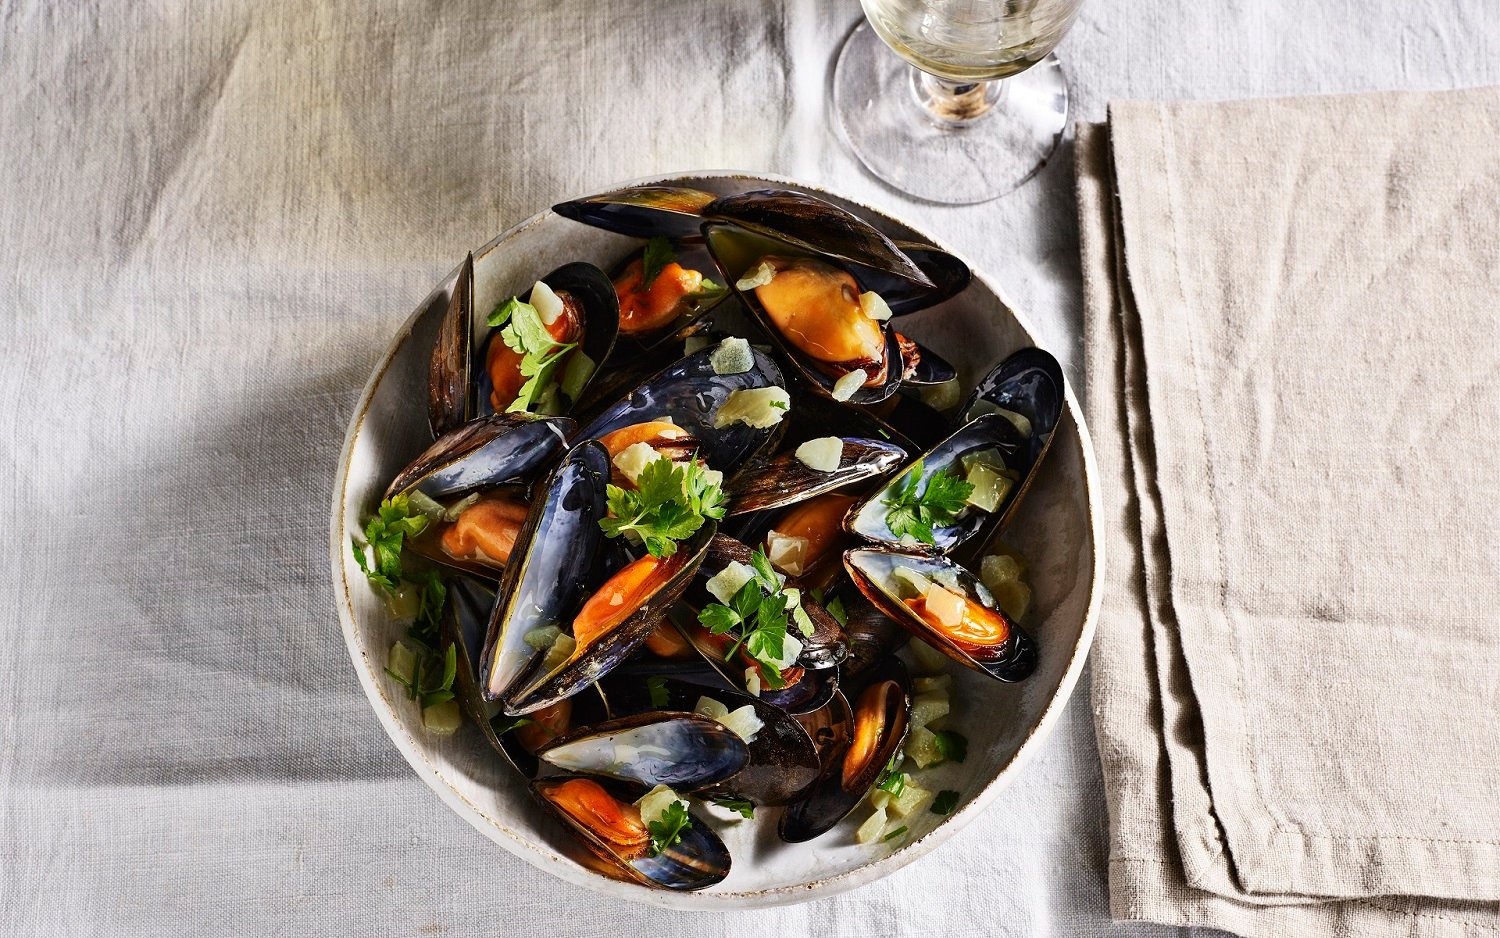 Steins-at-Home-Mussels